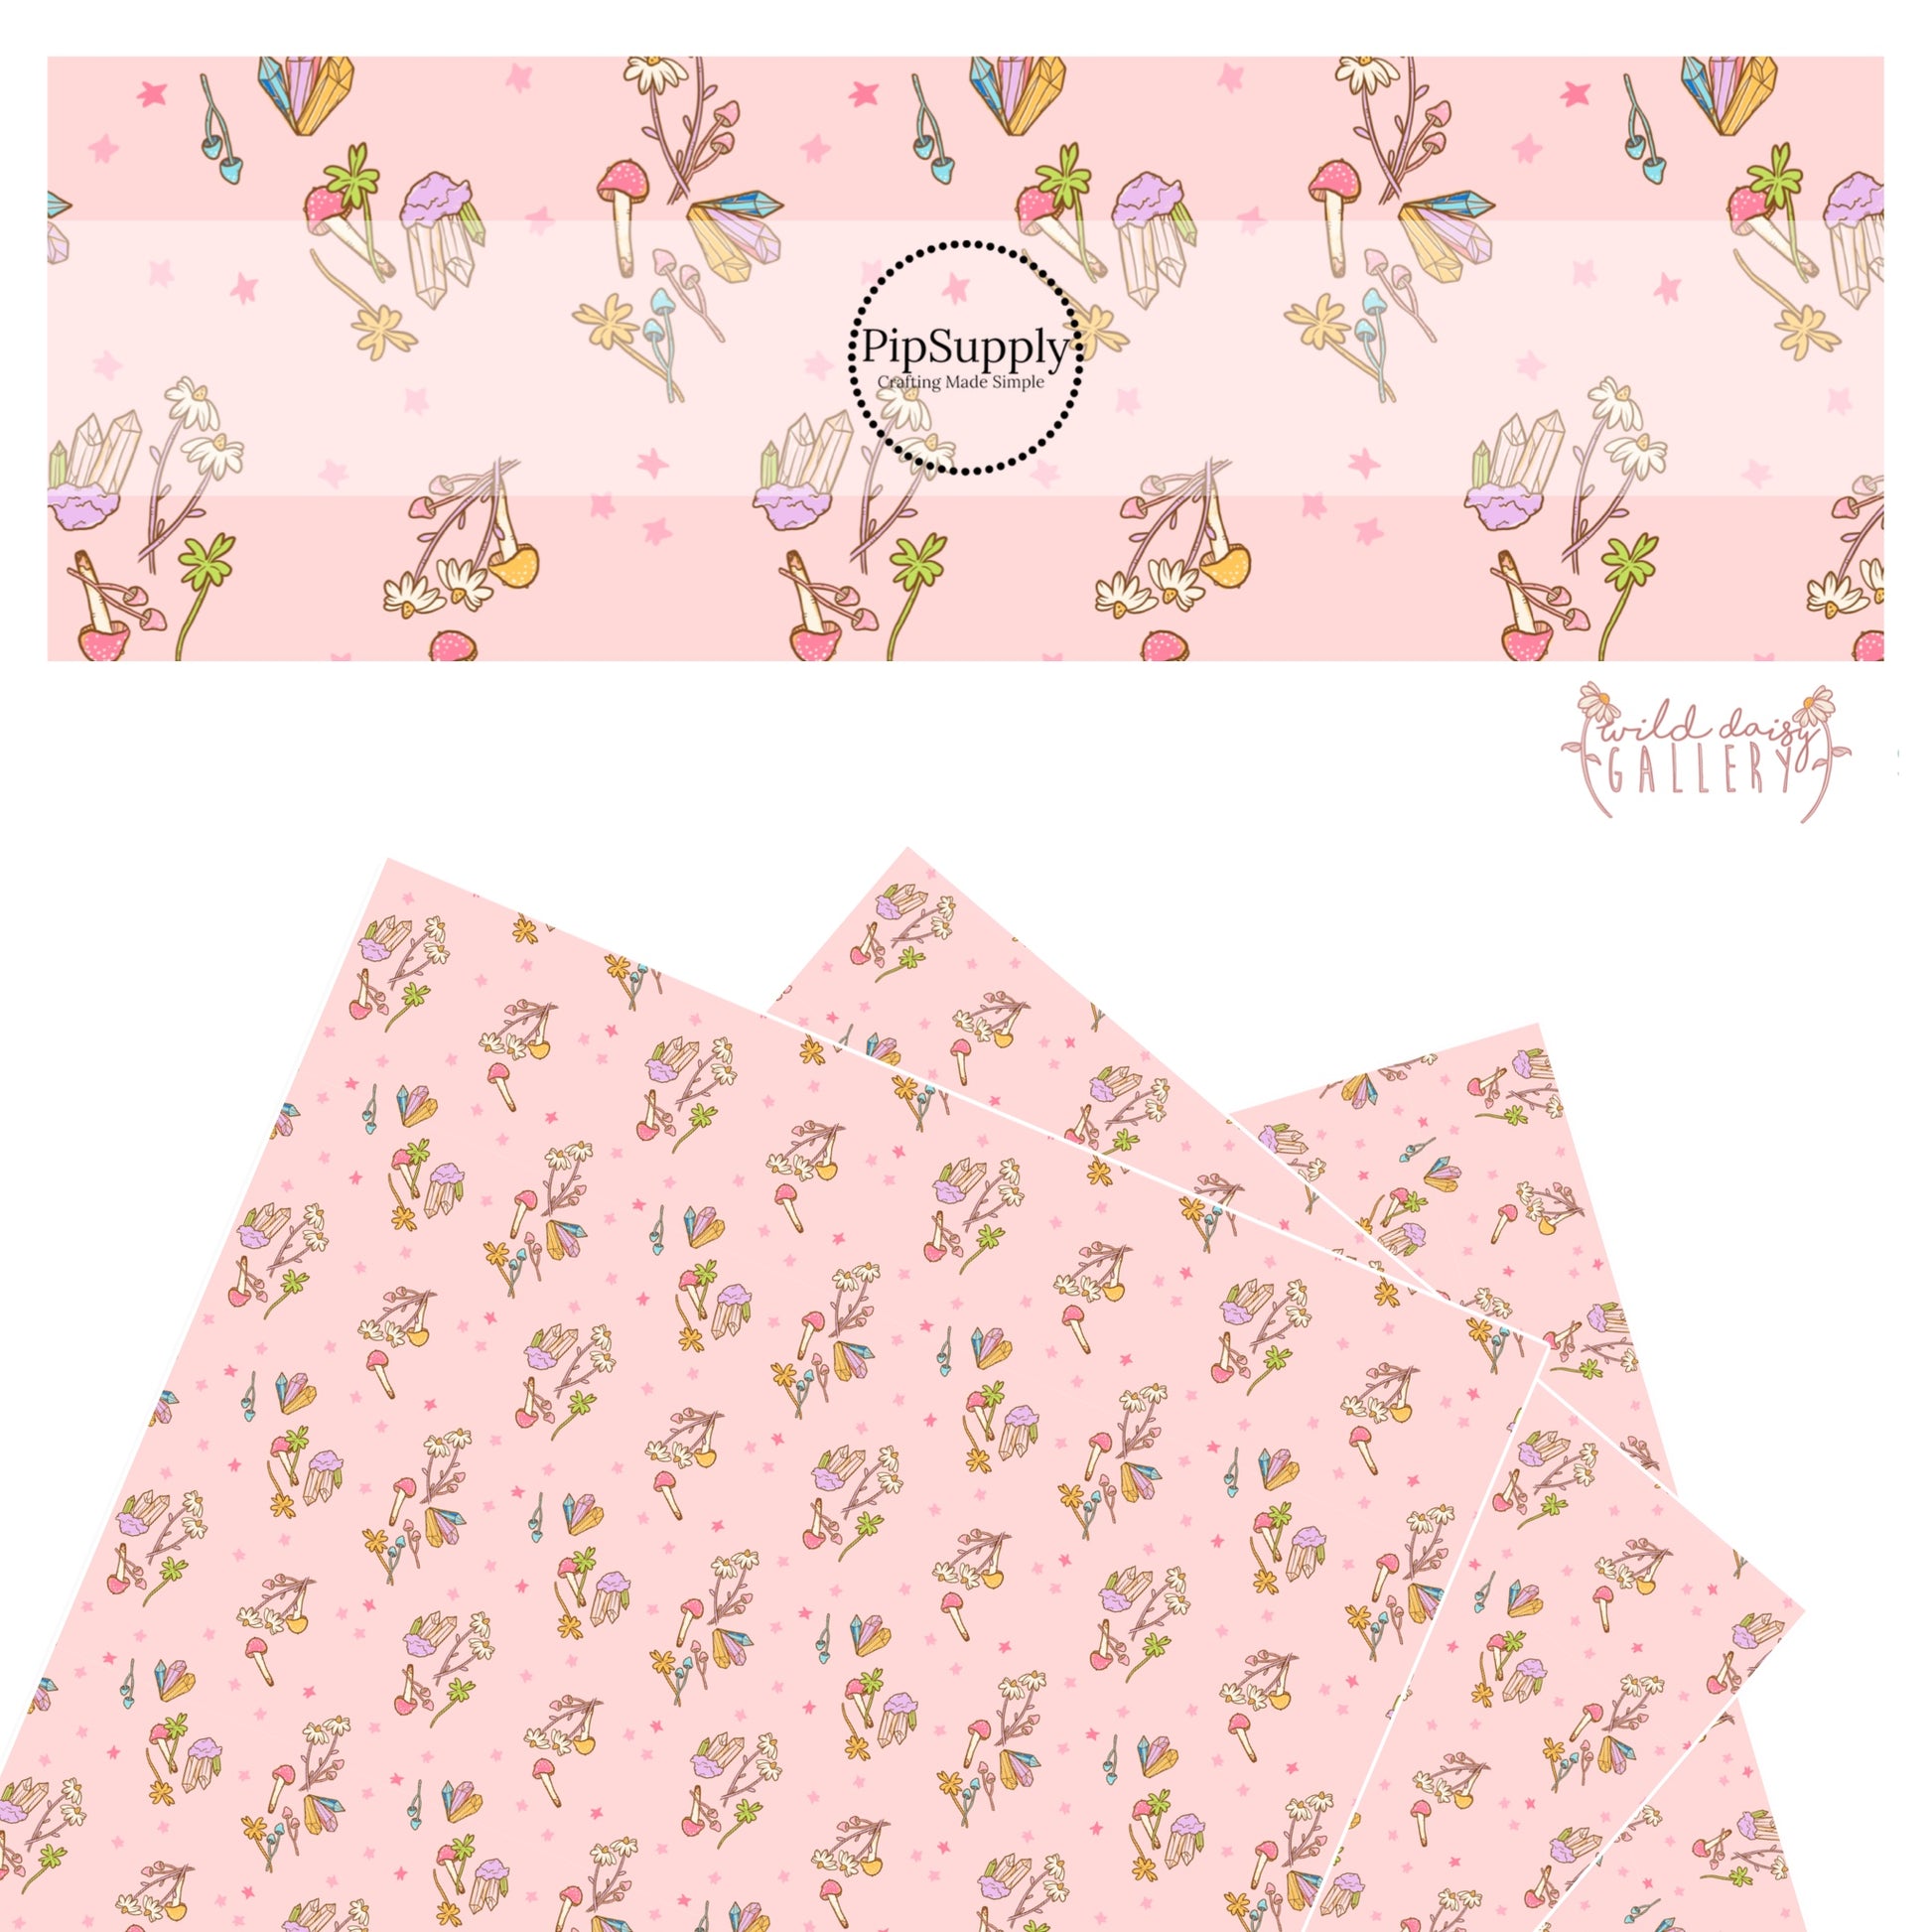 White flowers with green clovers and pink mushrooms with purple, blue, and yellow crystals on a pink faux leather sheet